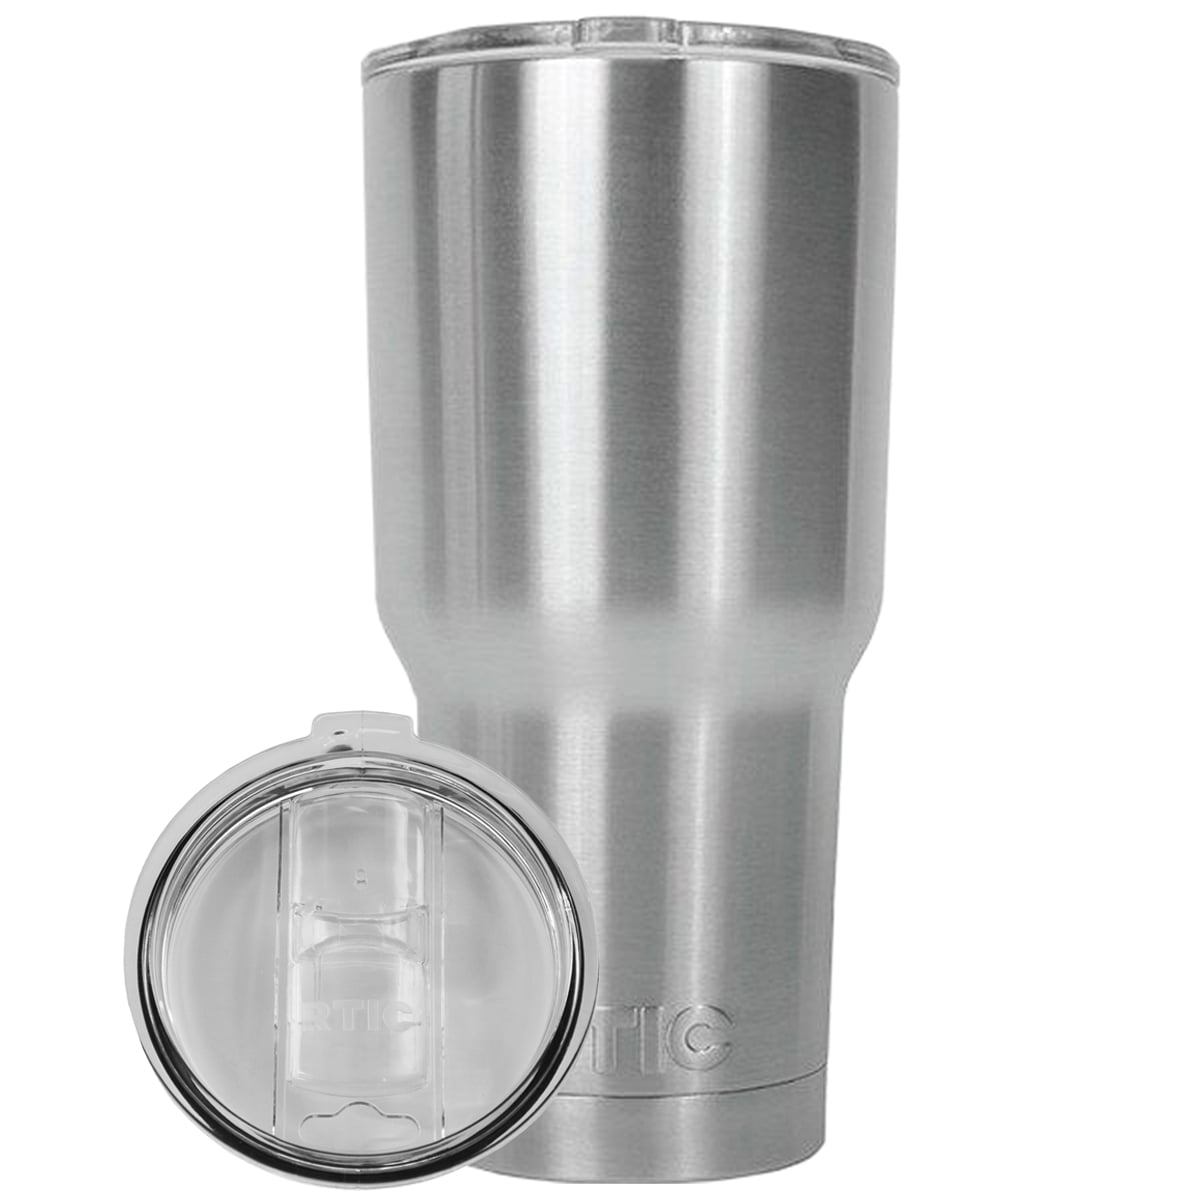 Rtic Stainless Steel Tumbler Pacific Glitter 30 oz with Splash Proof Lid  NEW!